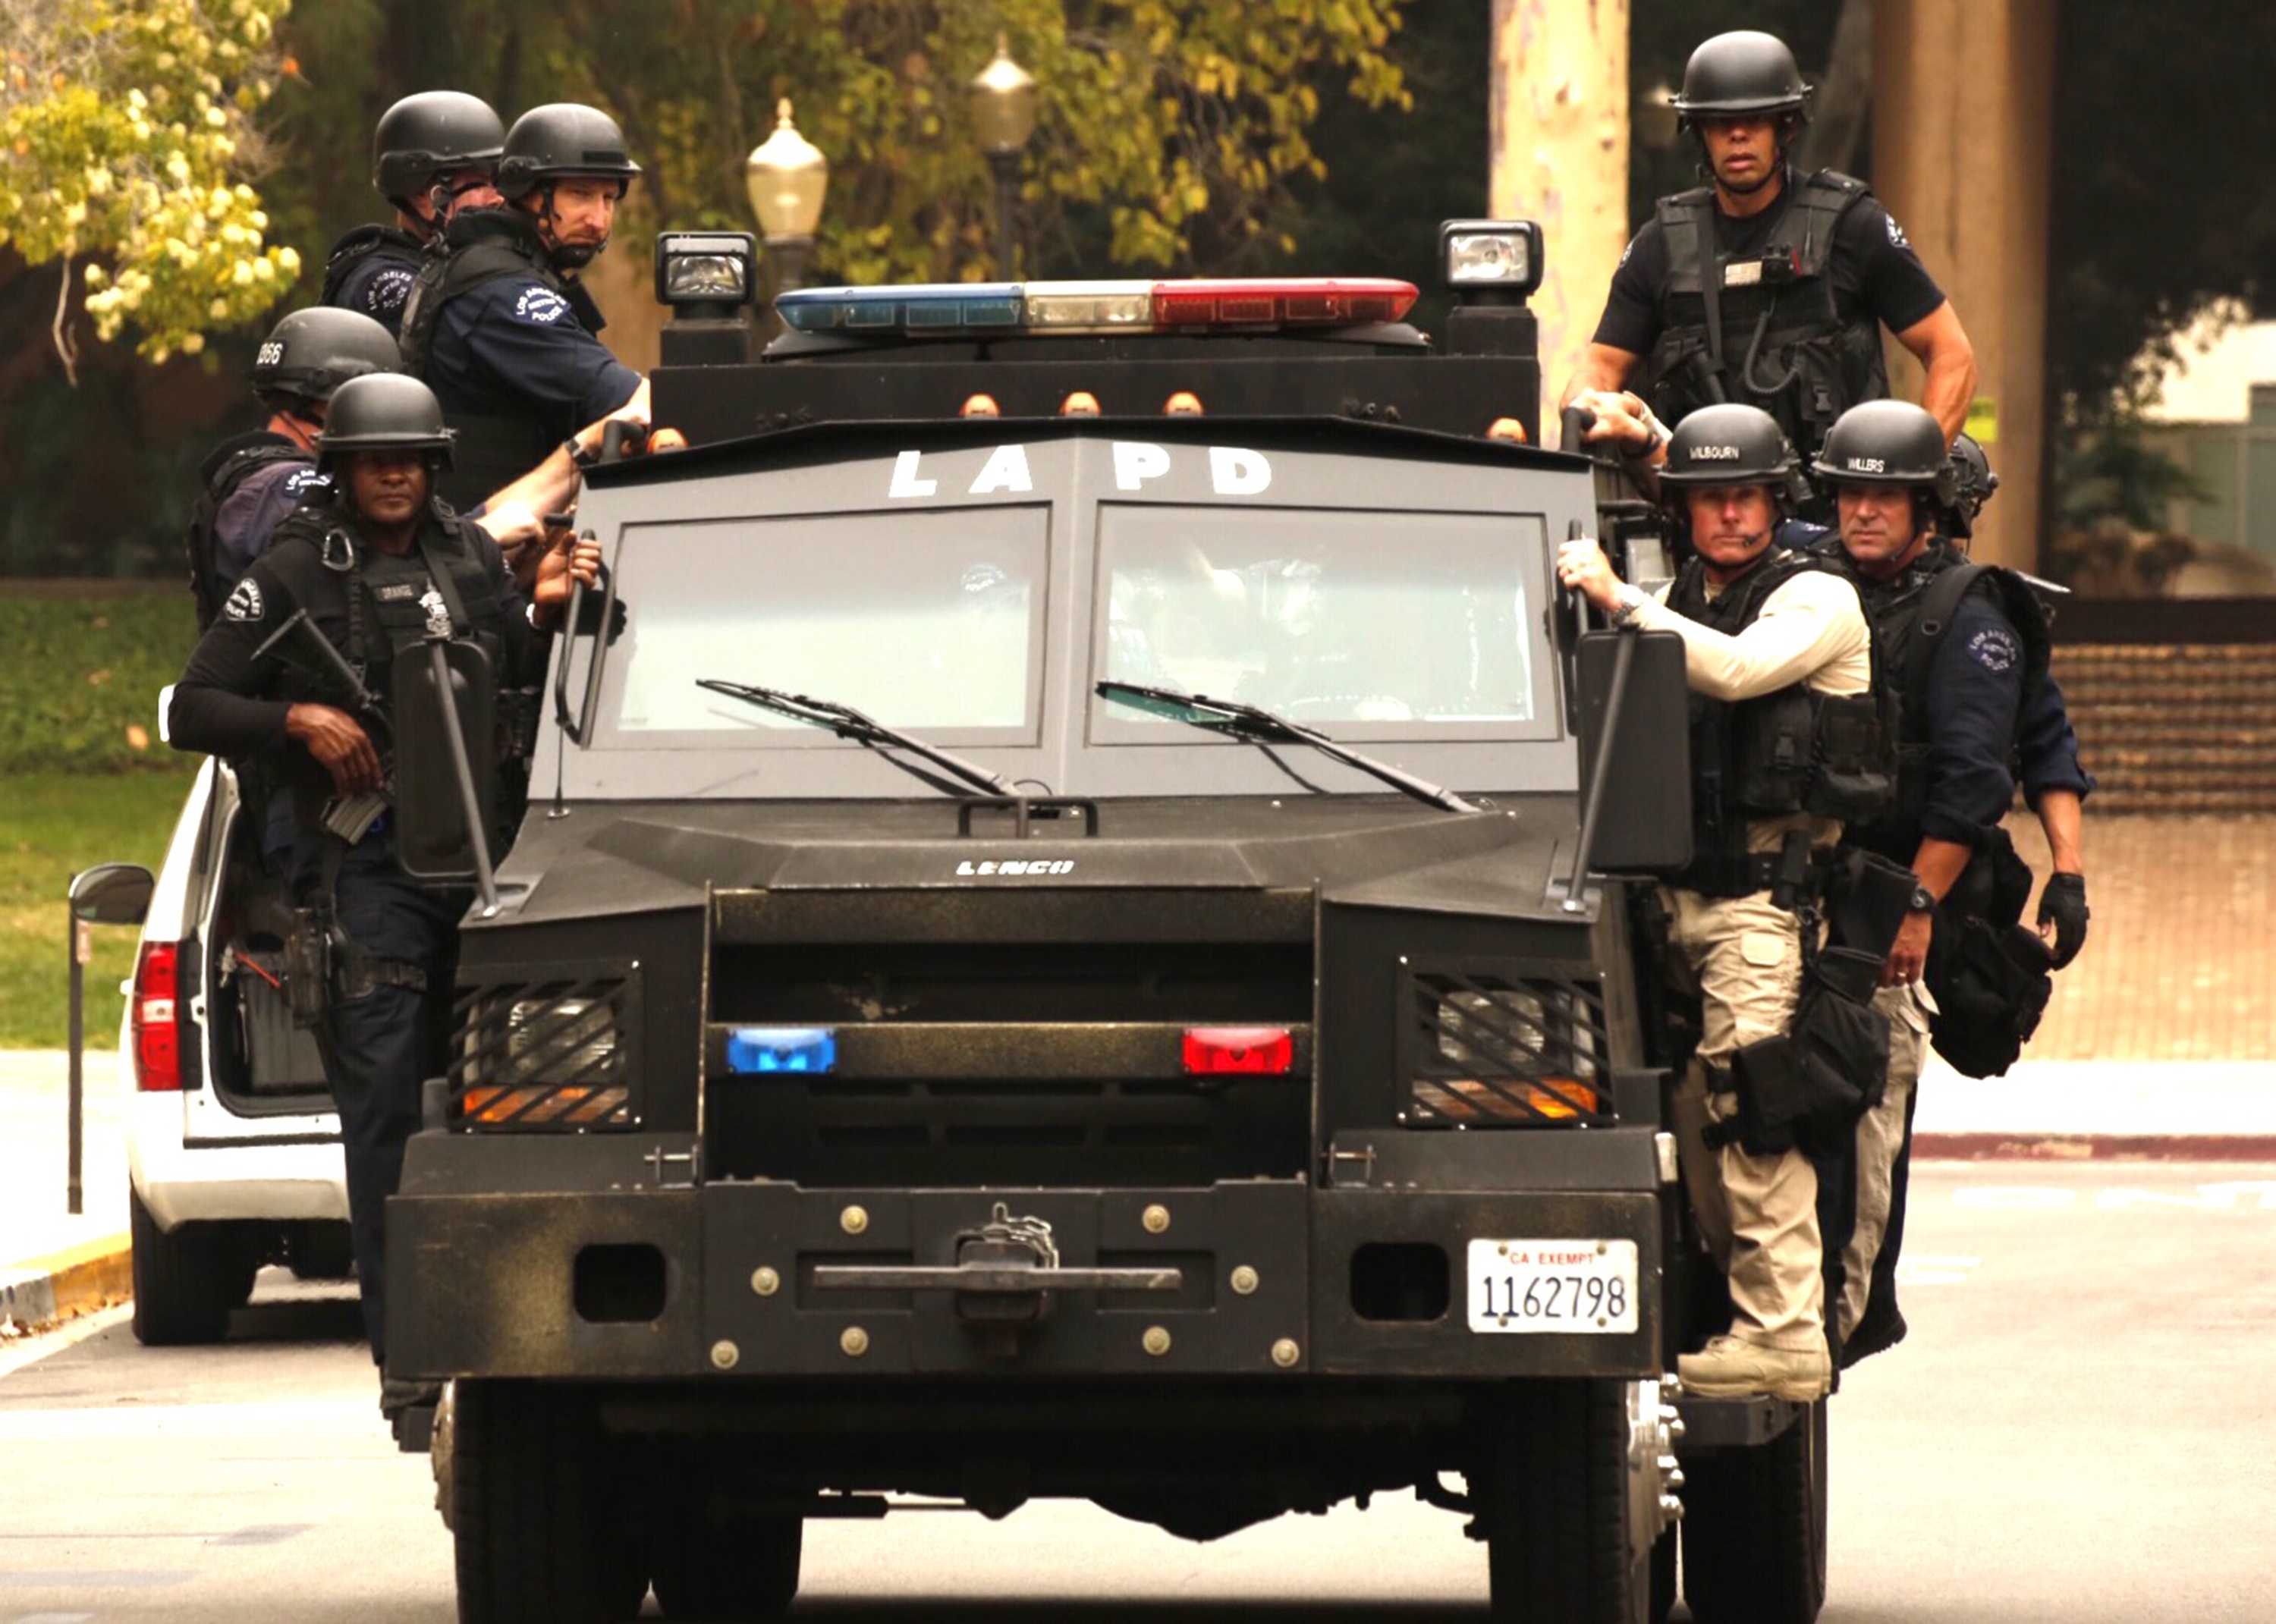 Police use armored vehicles to search and secure several buildings on the north end of the UCLA campus on Wednesday, June 1, 2016. (Al Seib/Los Angeles Times/TNS)